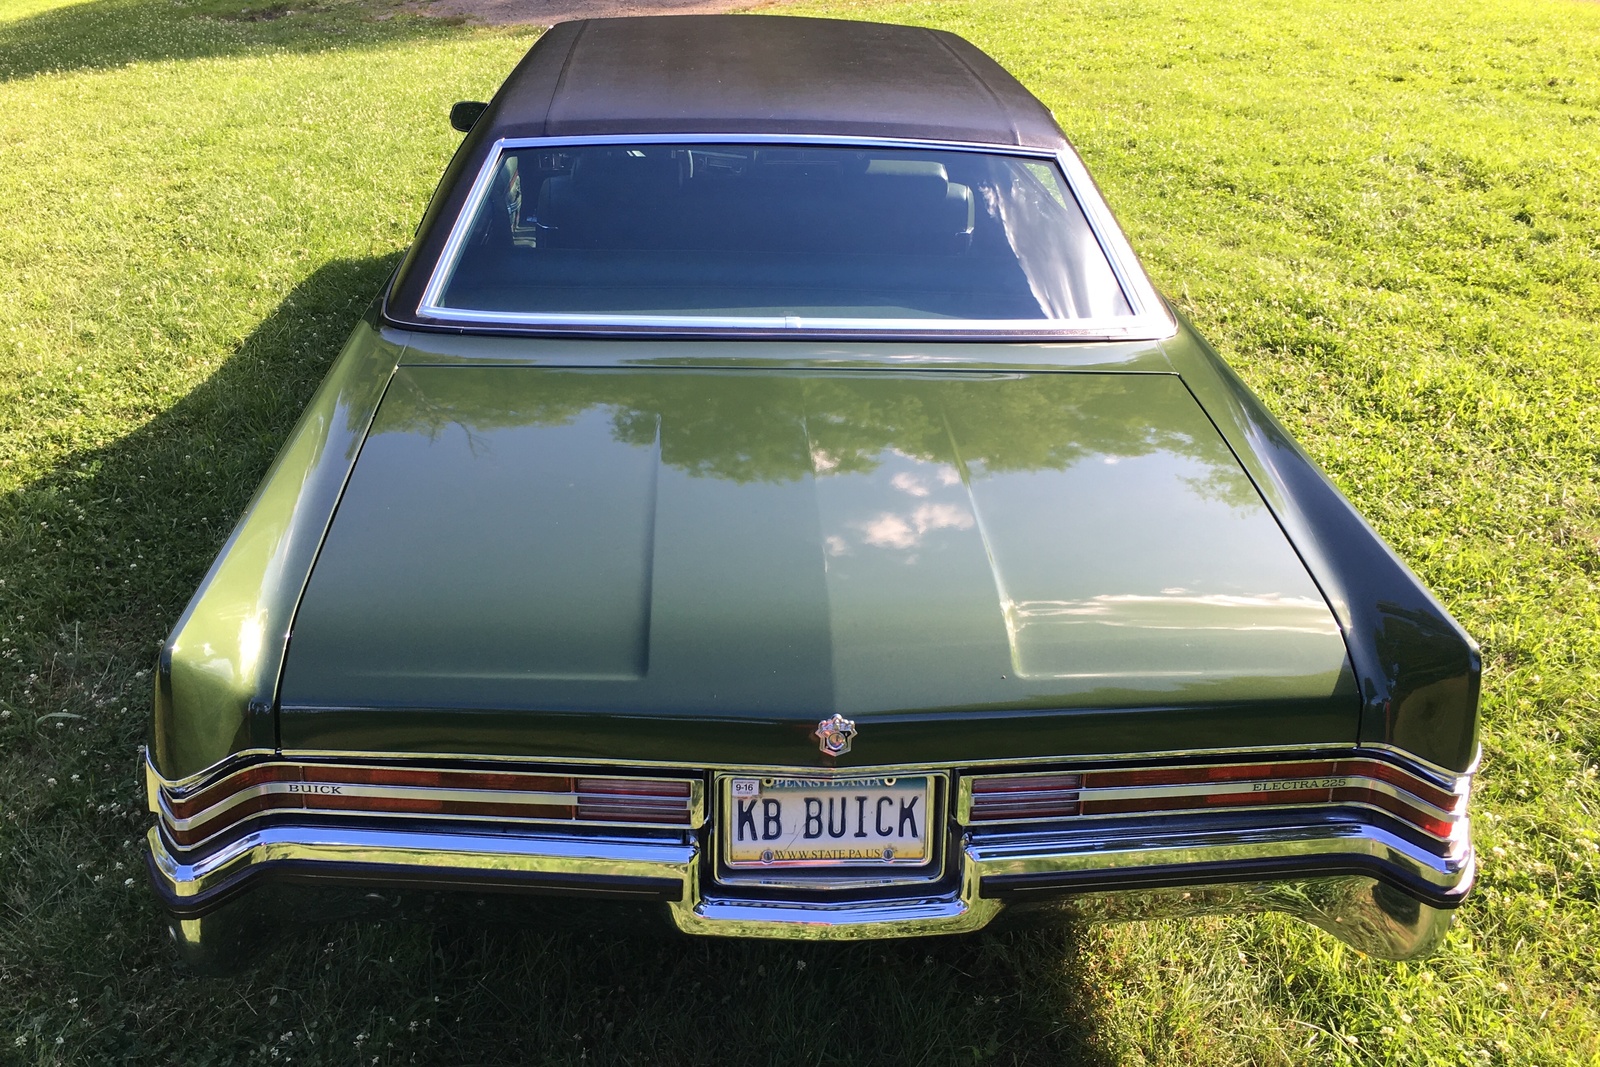 Buick 1972. Buick Electra 1971. Buick Electra 1972. Buick Electra 225 1972. Buick Electra 225 1976.